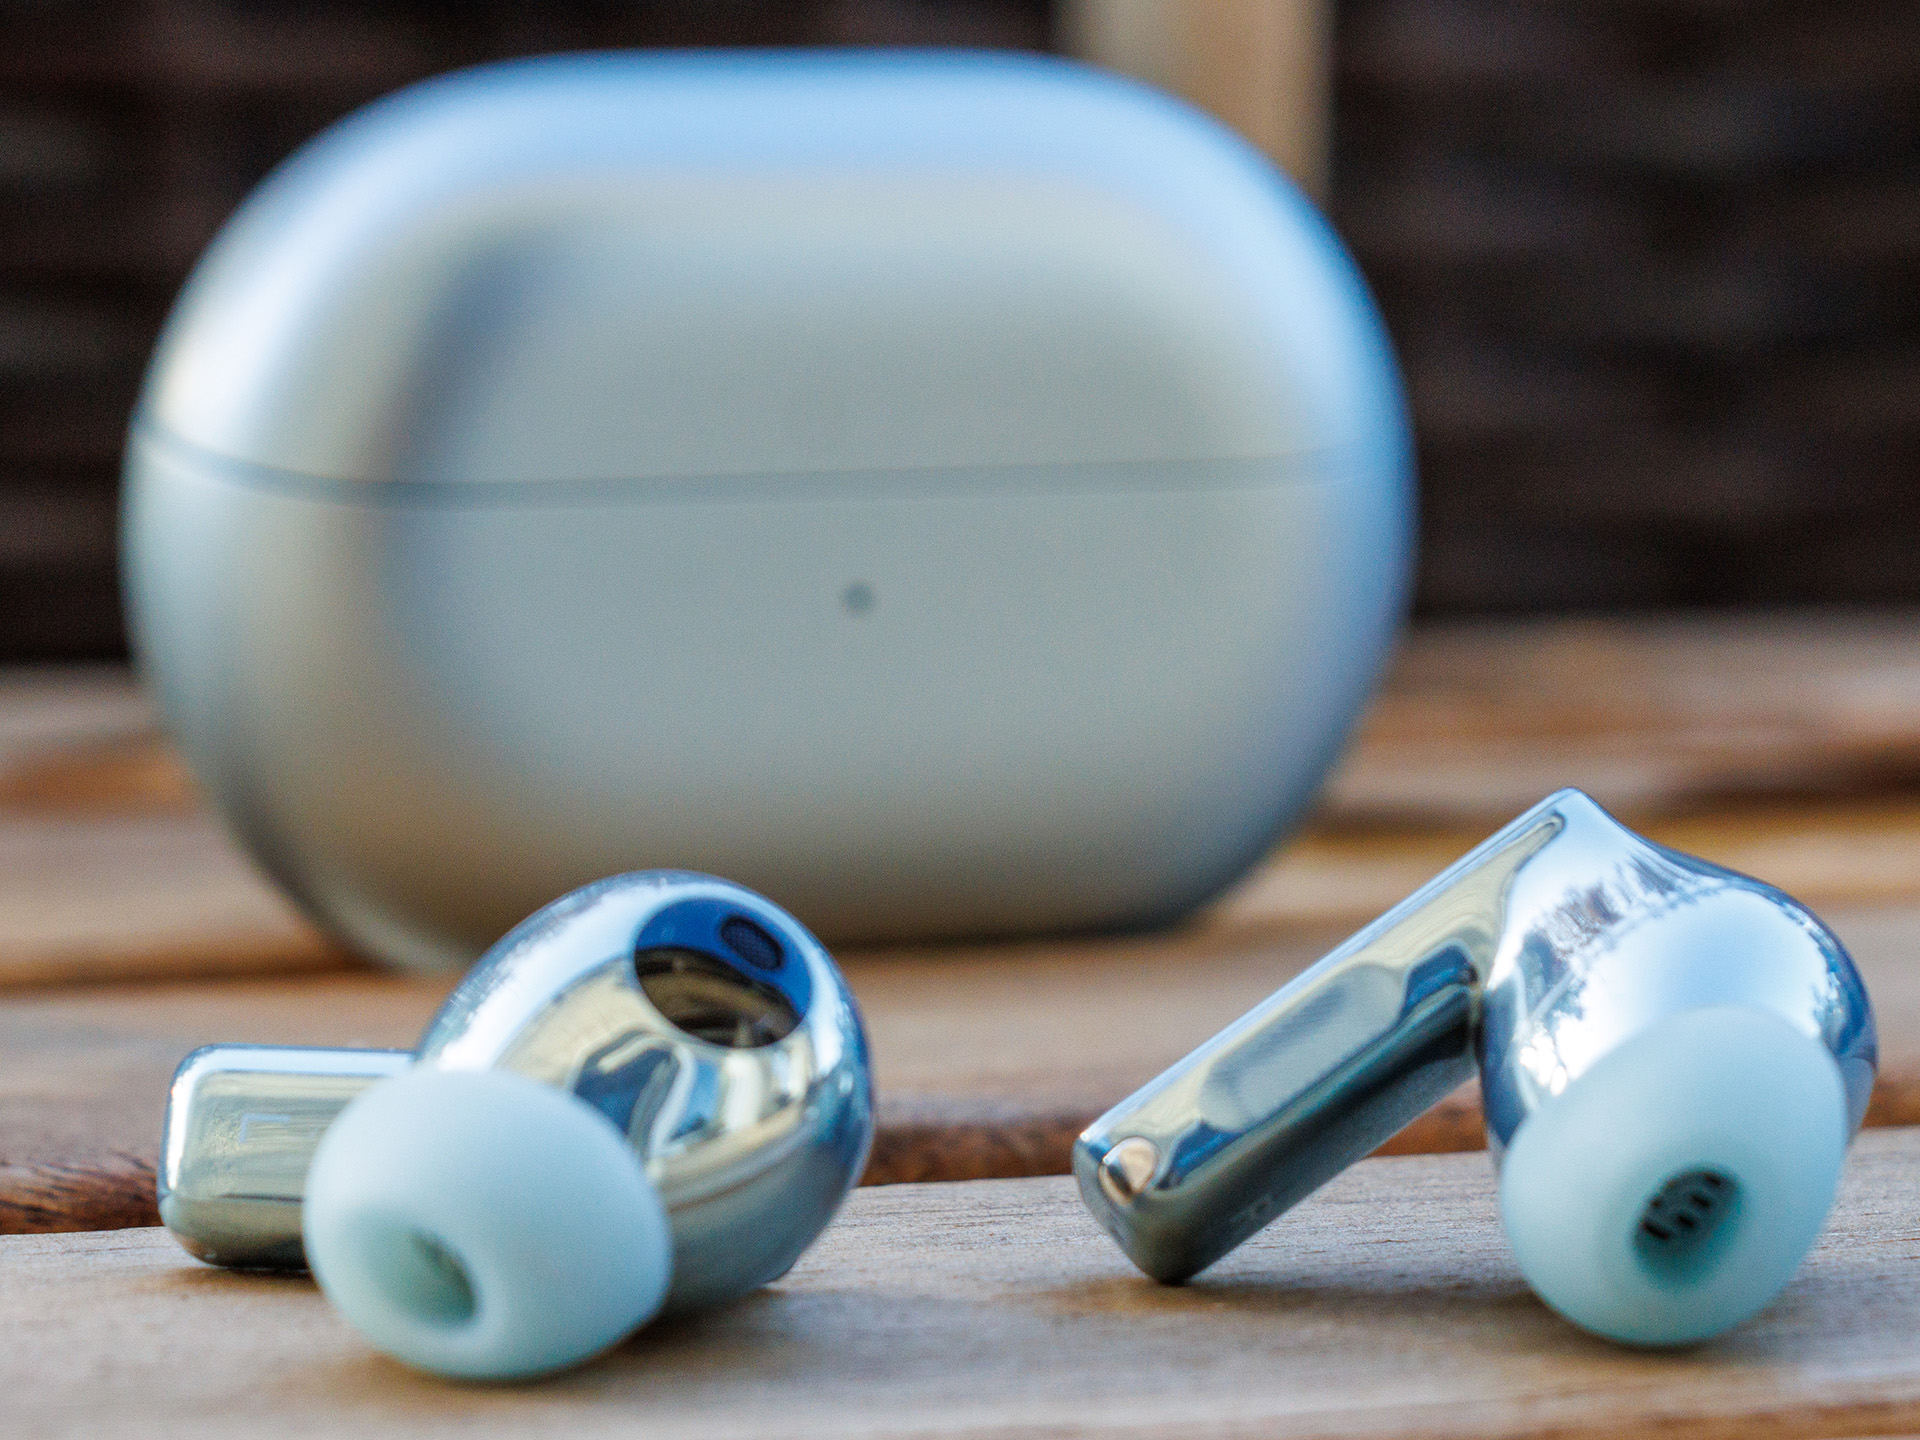 HUAWEI FreeBuds 3 review: No more AirPods envy - Android Authority